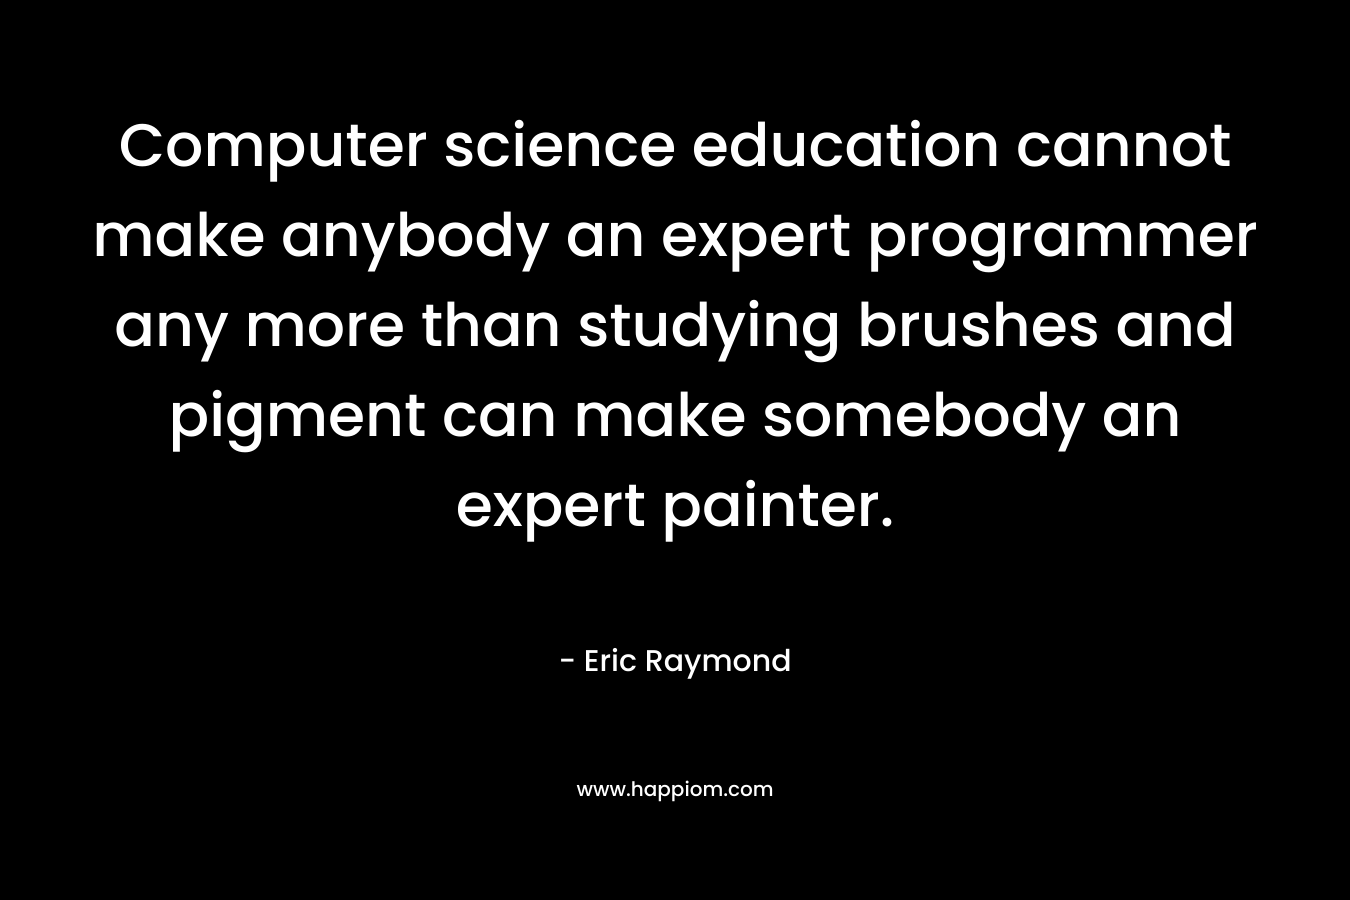 Computer science education cannot make anybody an expert programmer any more than studying brushes and pigment can make somebody an expert painter.